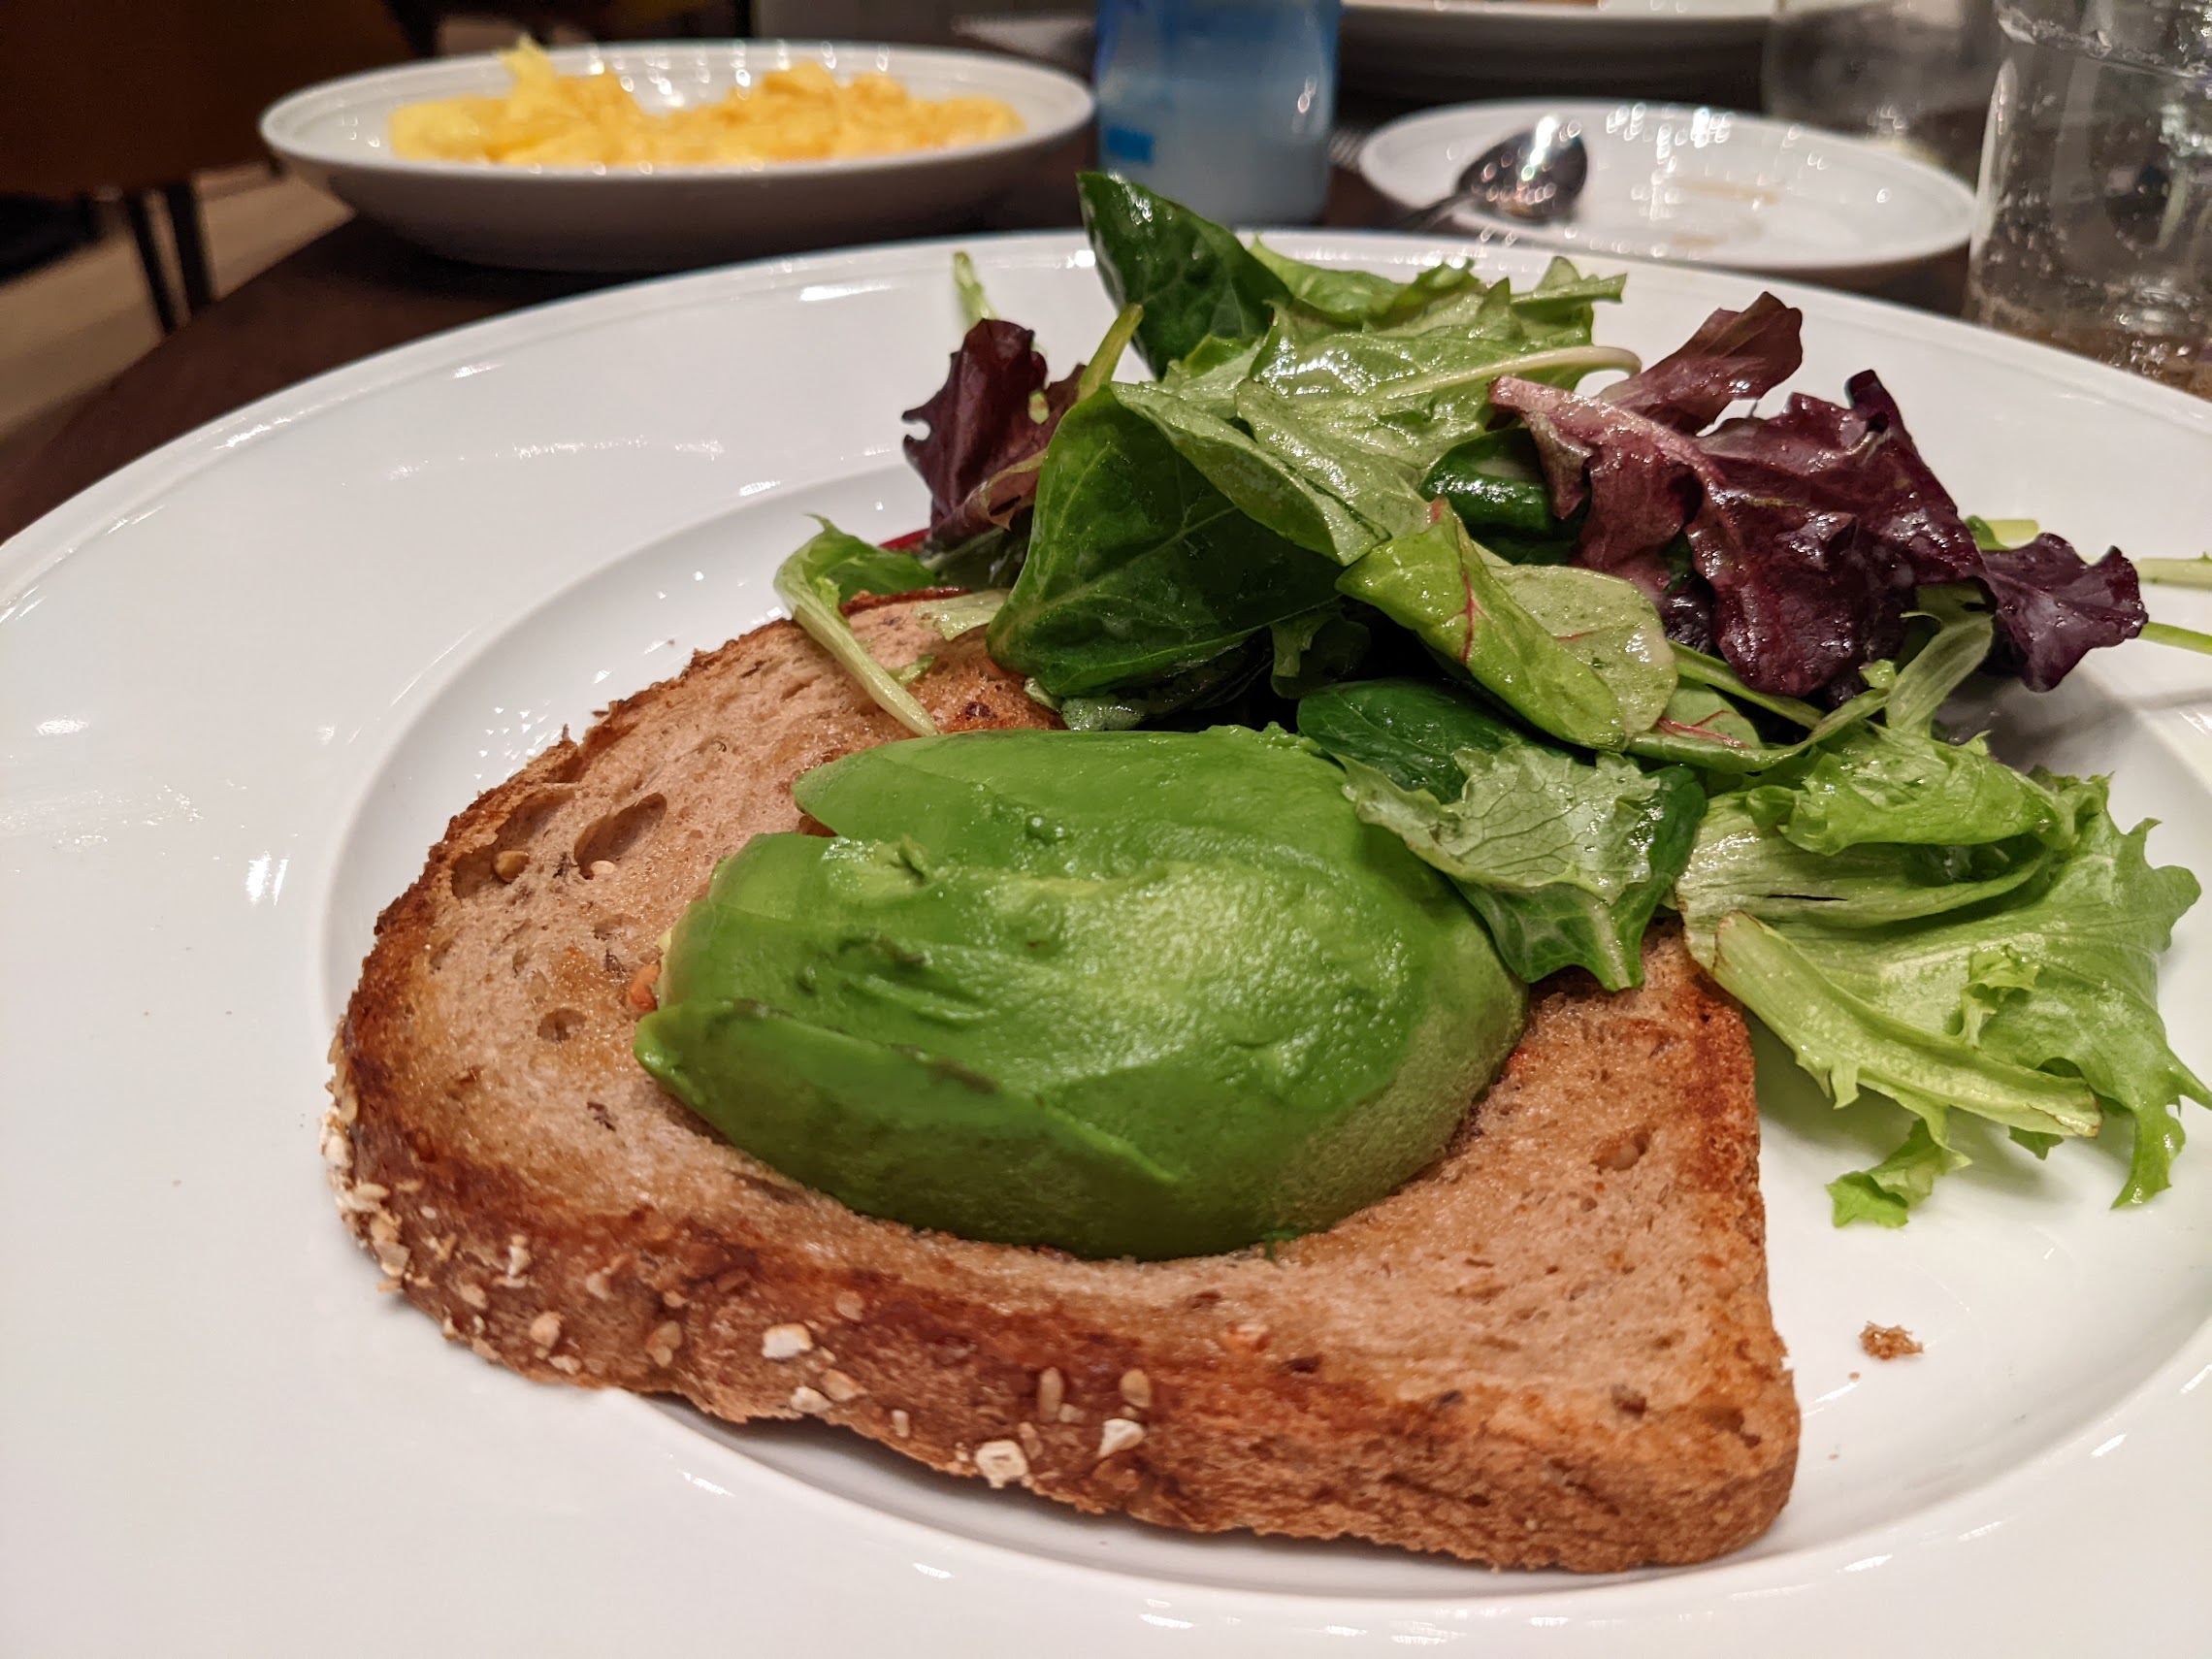 a plate of food with a green avocado on top